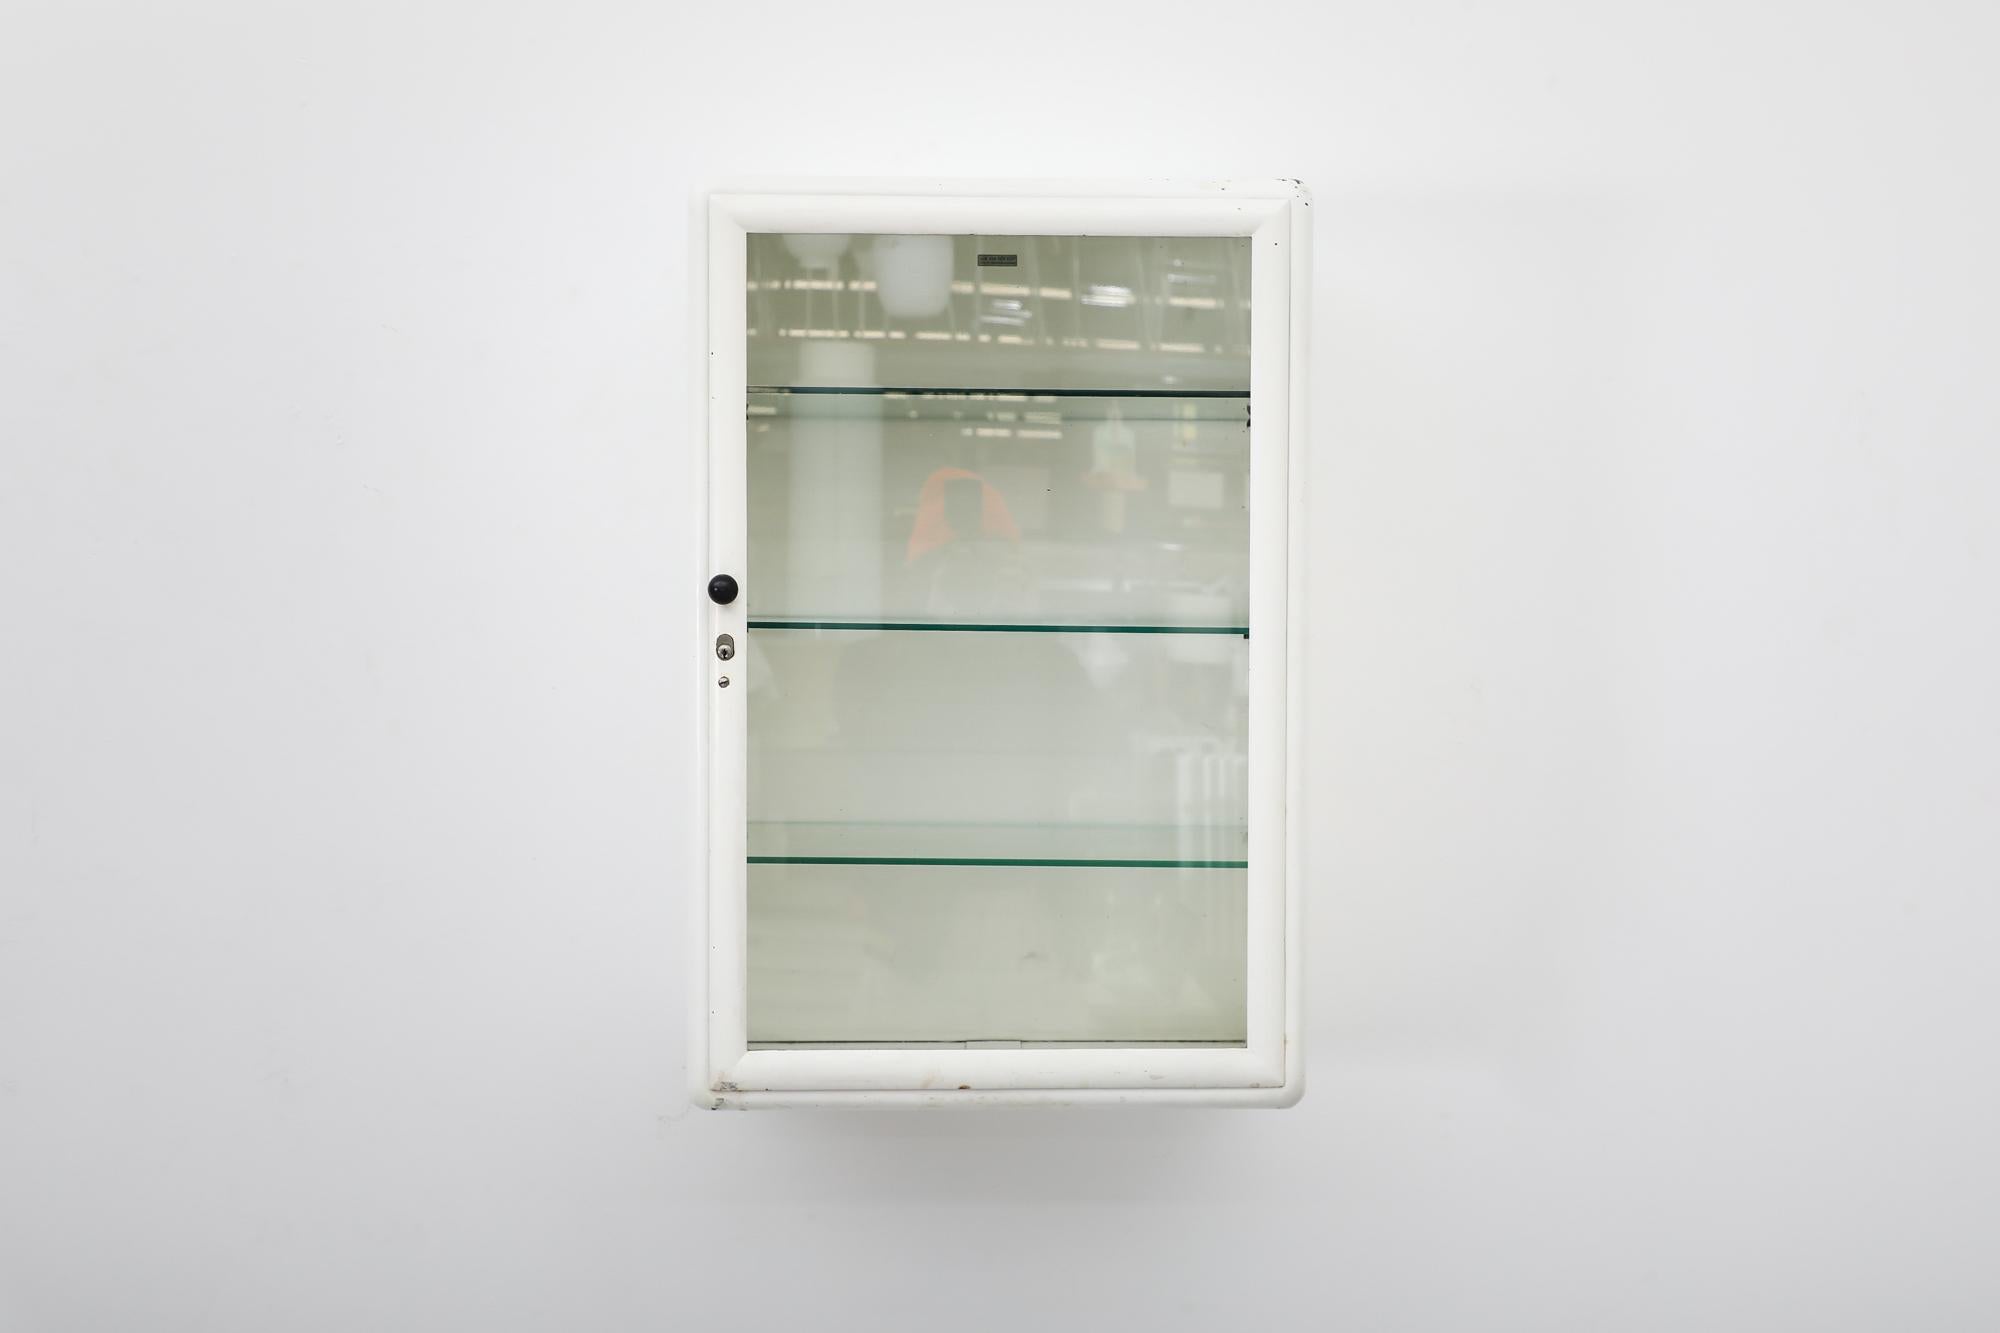 Vintage white enameled metal wall mounted medicine cabinet with glass door and glass shelves. Missing key. In very original condition with visible wear and patina, including scratches and some paint loss. Wear is consistent with its age and use.